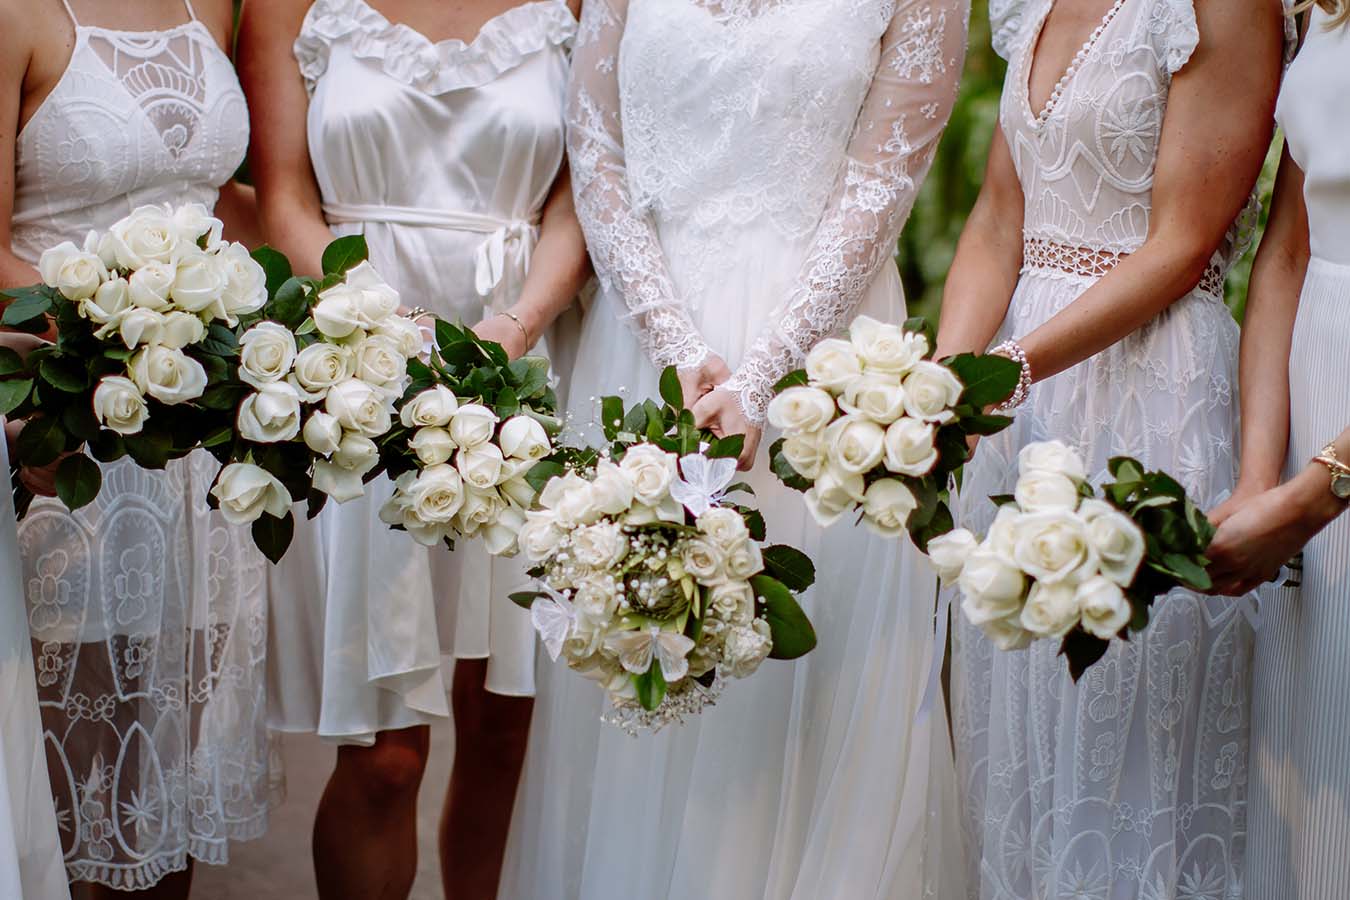 Auckland Wedding Photographer.flowers Bride and bridesmaids at the bridal party outside Auckland Wintergardens